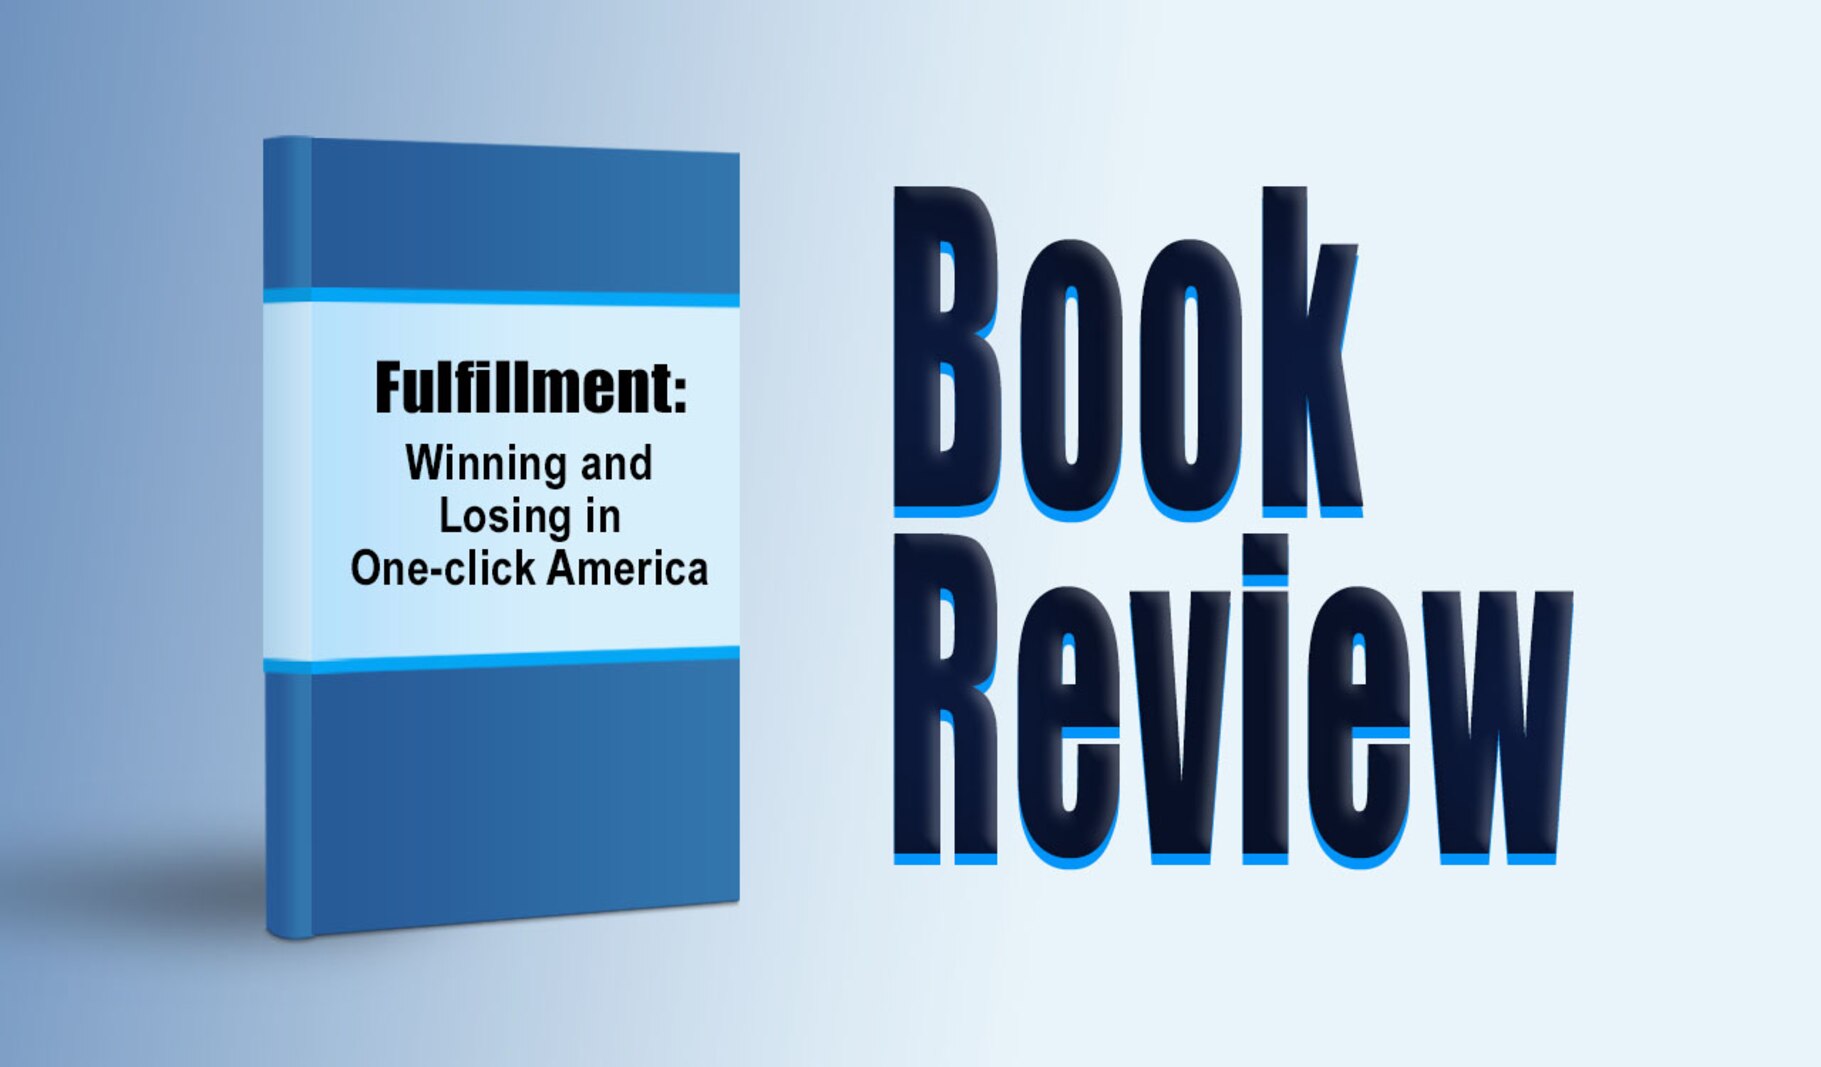 Standing book image of Fulfillment: Winning and Losing in One-click America, by Alec MacGillis